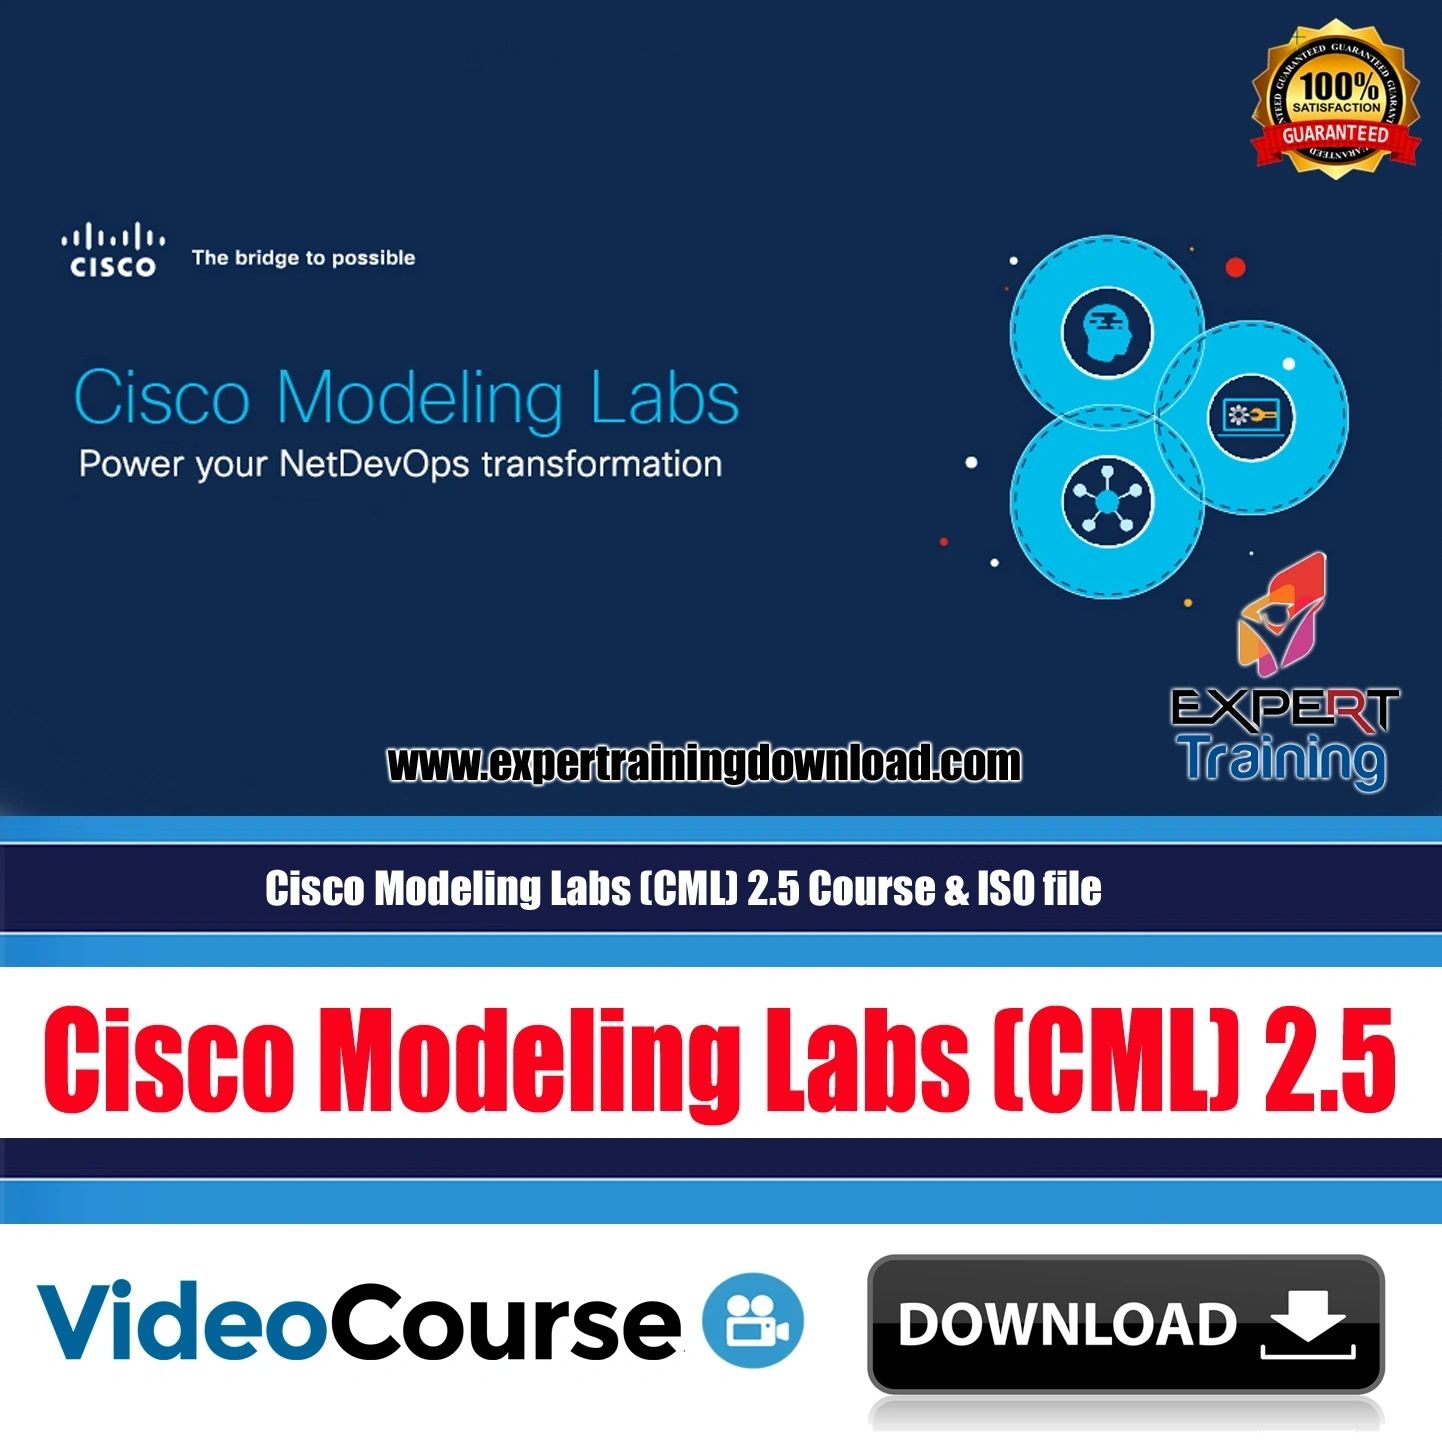 Cisco Modeling Labs (CML) 2.5 Course & ISO file